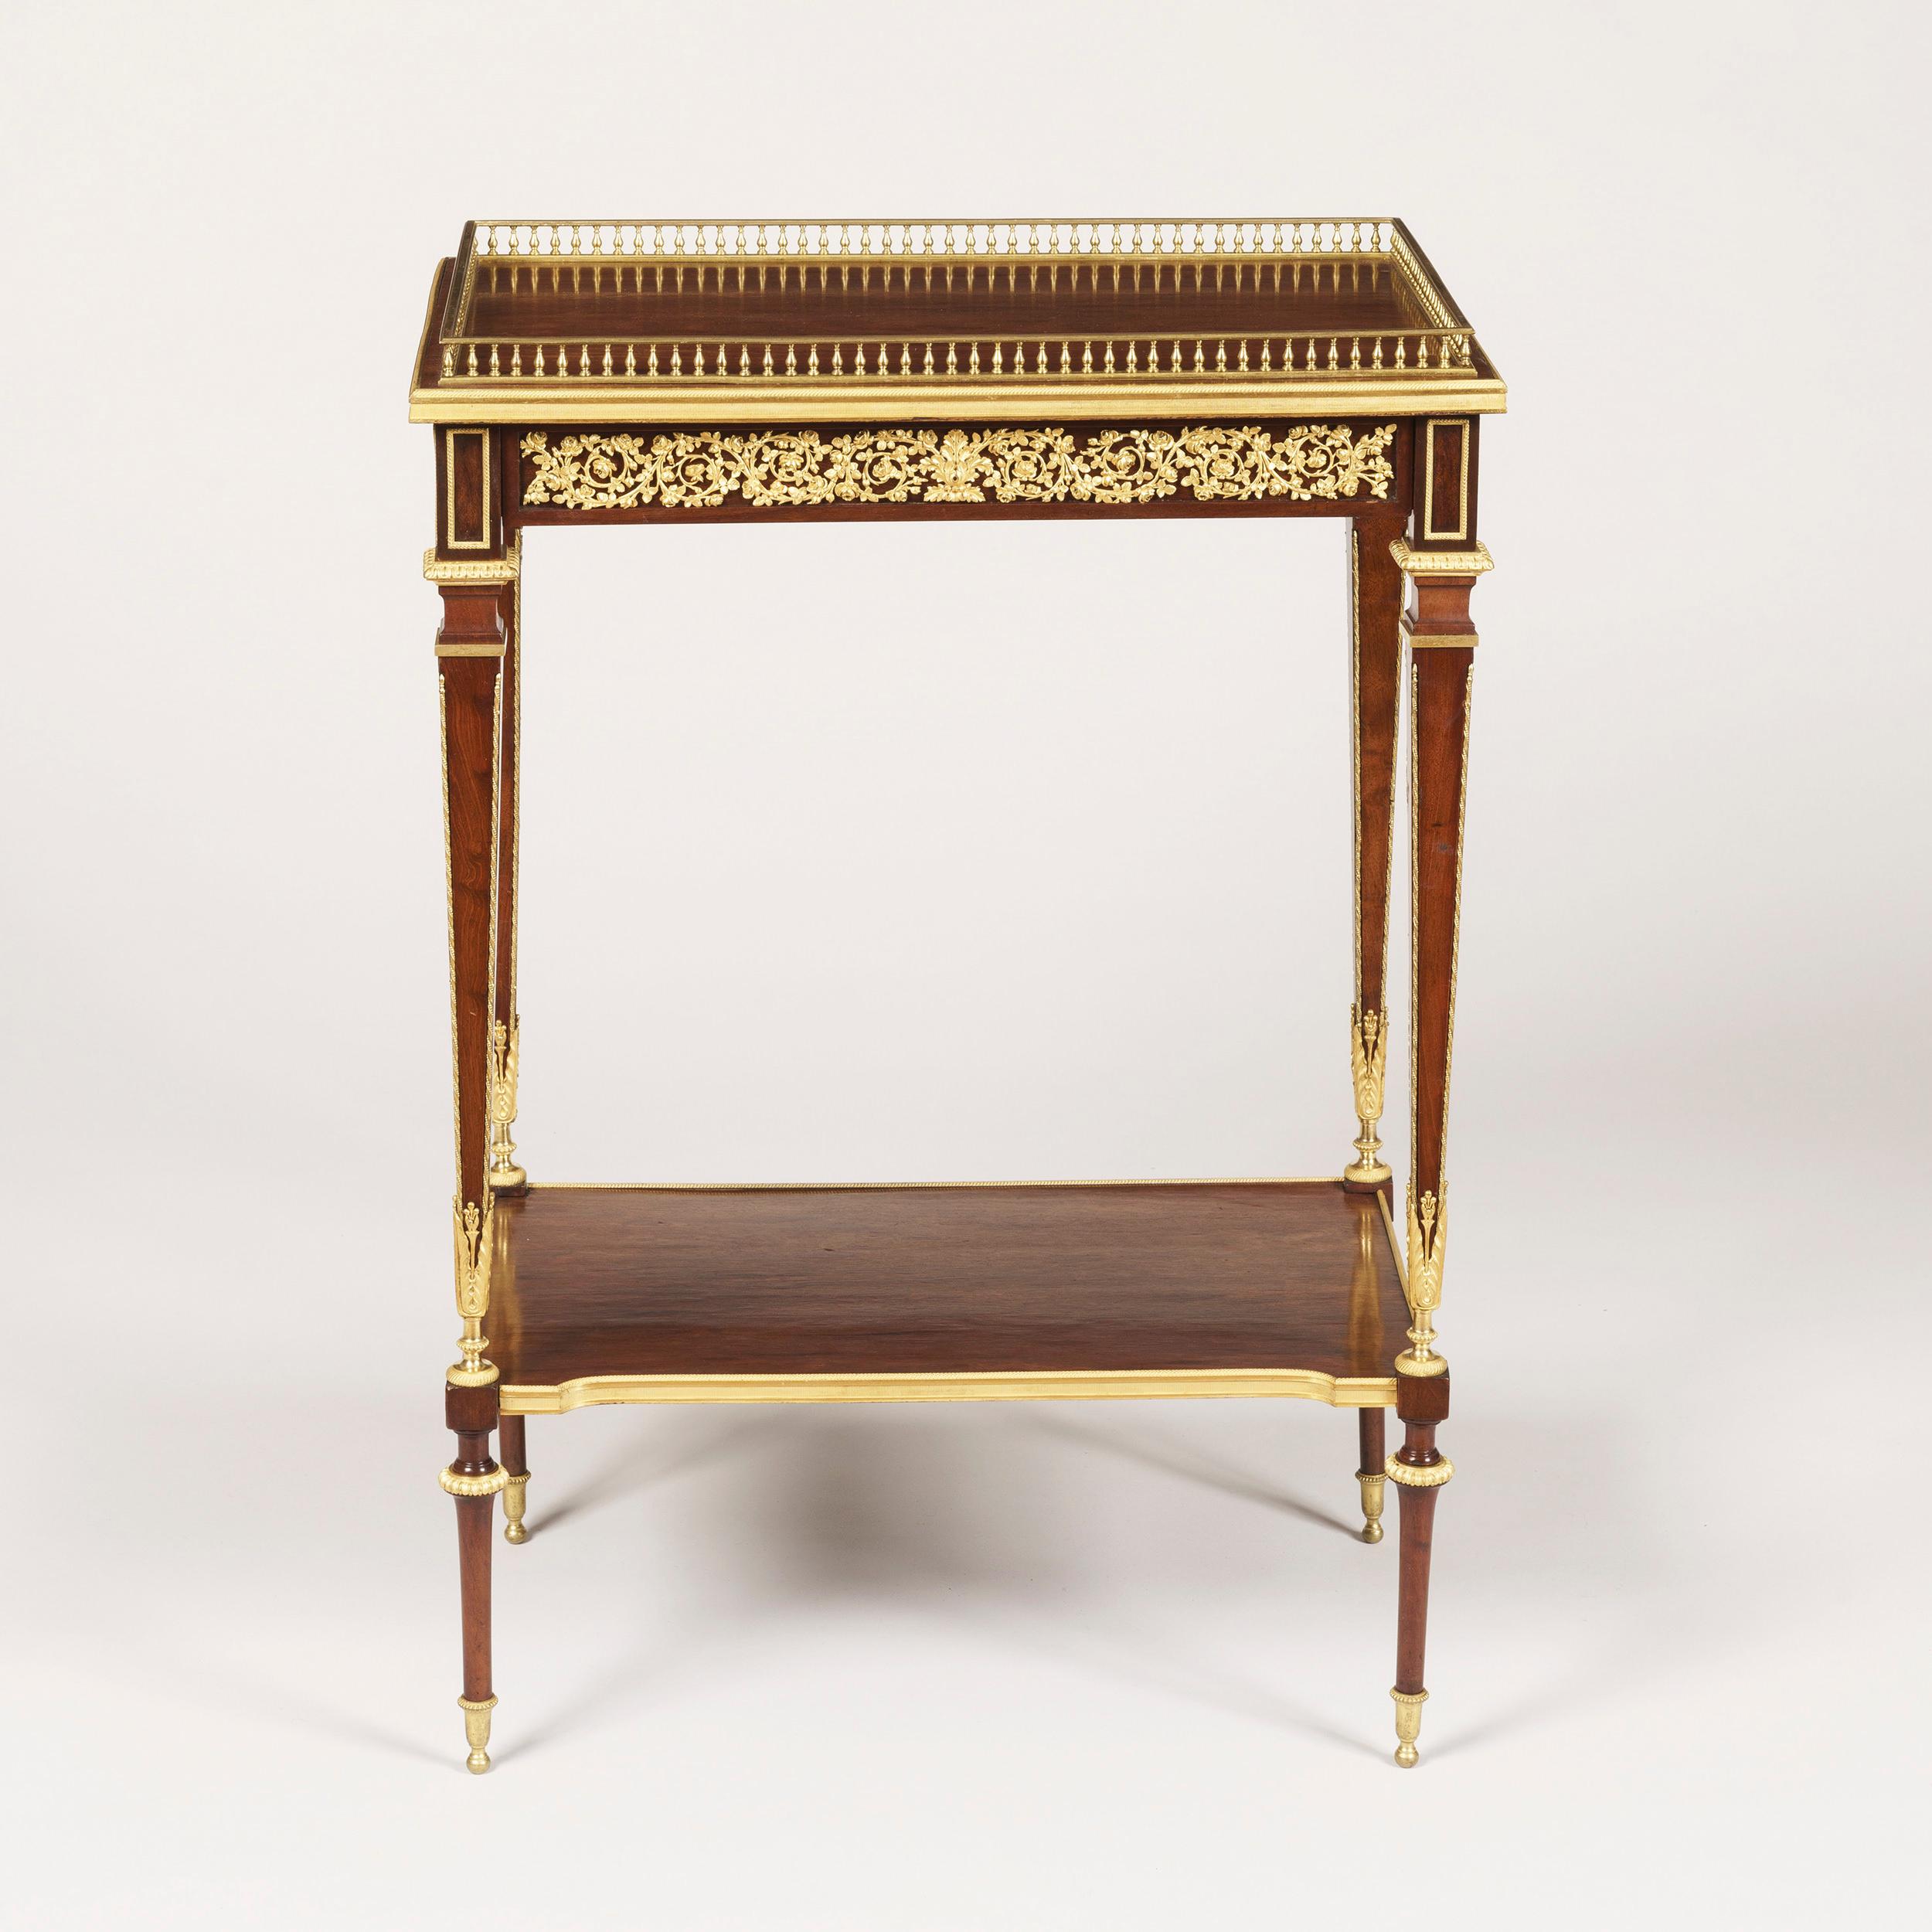 A matched pair of side tables in the Louis XVIth manner
by Paul Sormani

Of rectangular form constructed in mahogany, with gilt bronze ormolu enrichments; rising from truncated conical legs adorned with ormolu sabots, the lower tiers of incurved